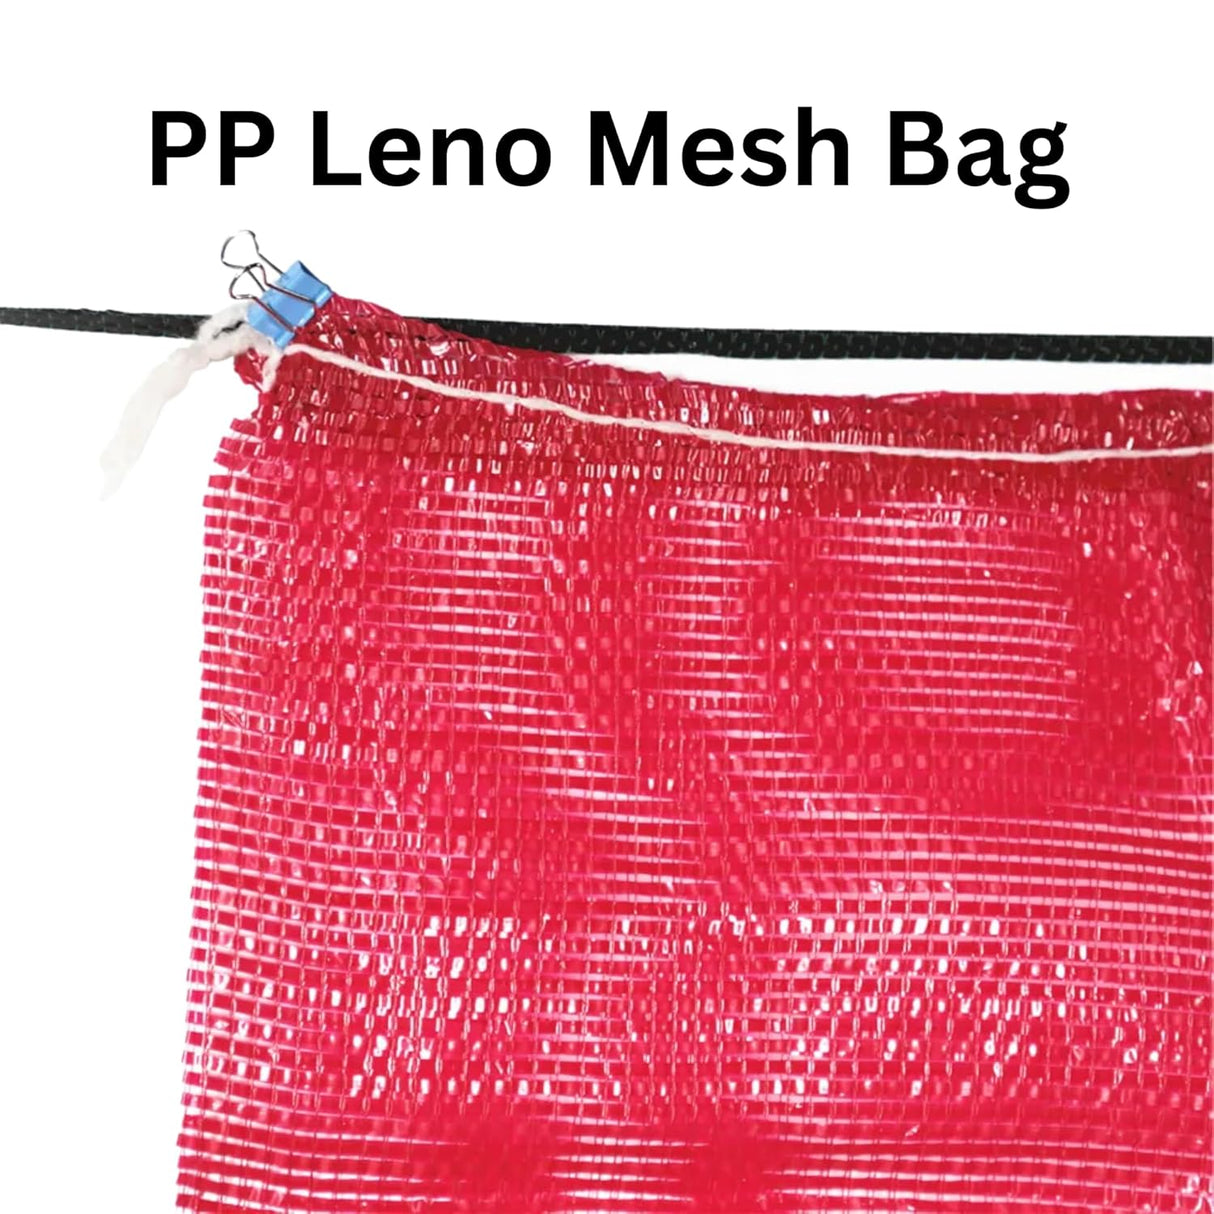 SINGHAL Leno Mesh Storage Produce Bags Reusable for Vegetable Storage Bags Onion Storage Washable Net Bags (30x20 Inch - Yellow, 50)